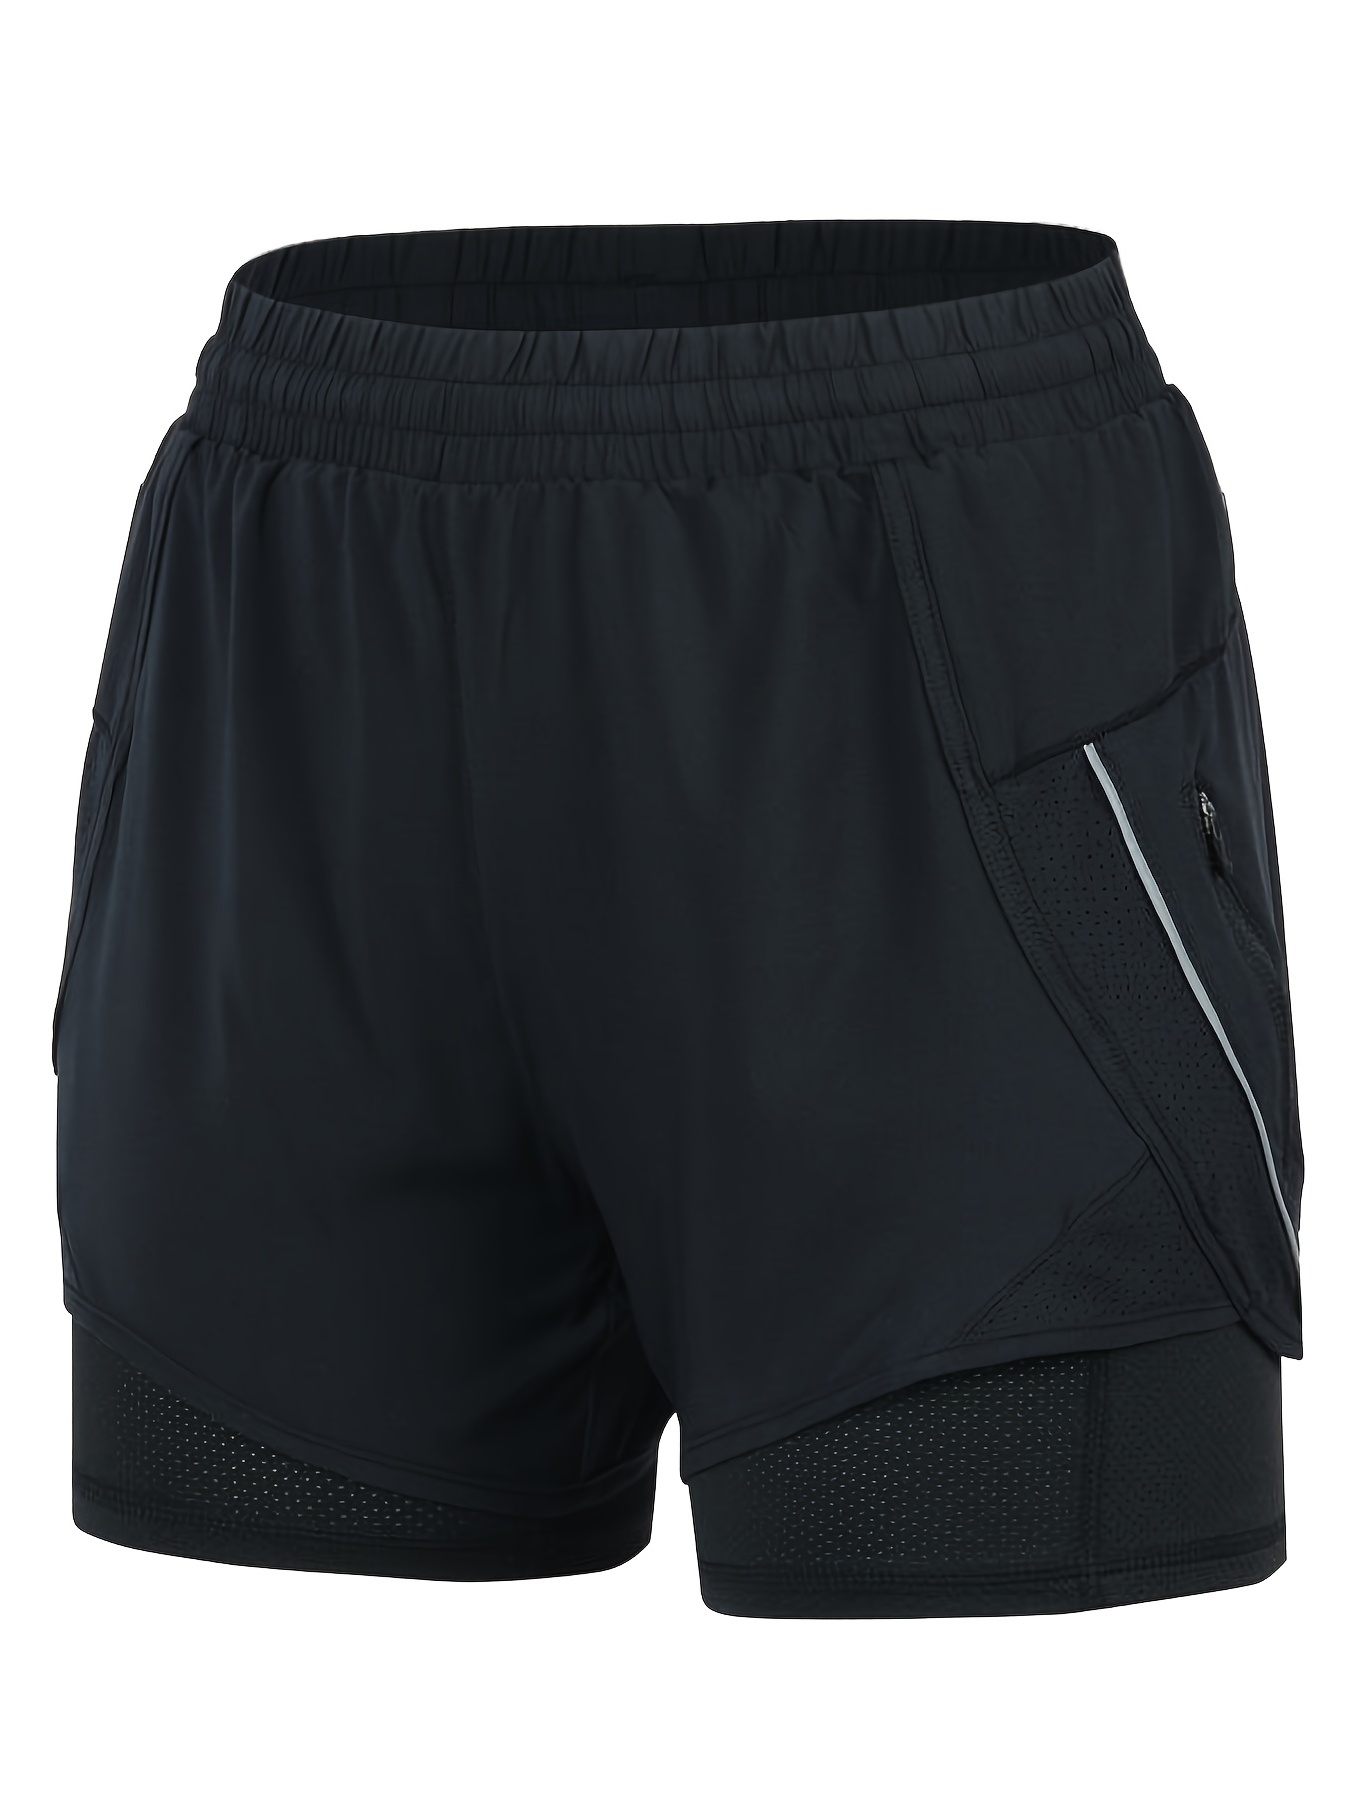 Womens Running Shorts 2 in 1 Athletic Shorts with Pockets